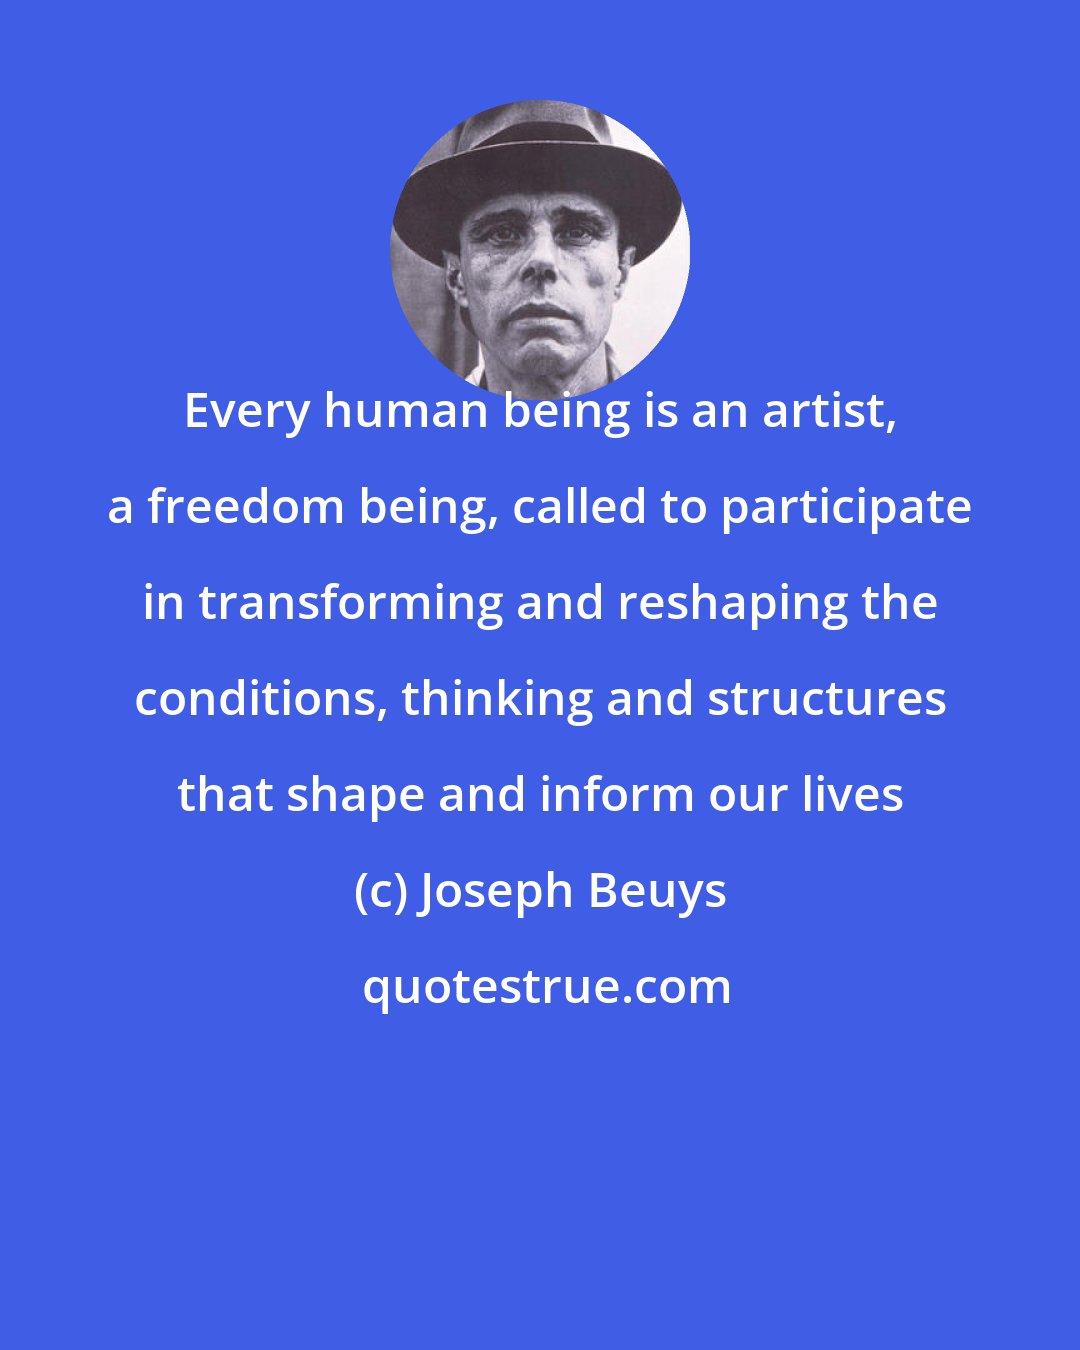 Joseph Beuys: Every human being is an artist, a freedom being, called to participate in transforming and reshaping the conditions, thinking and structures that shape and inform our lives